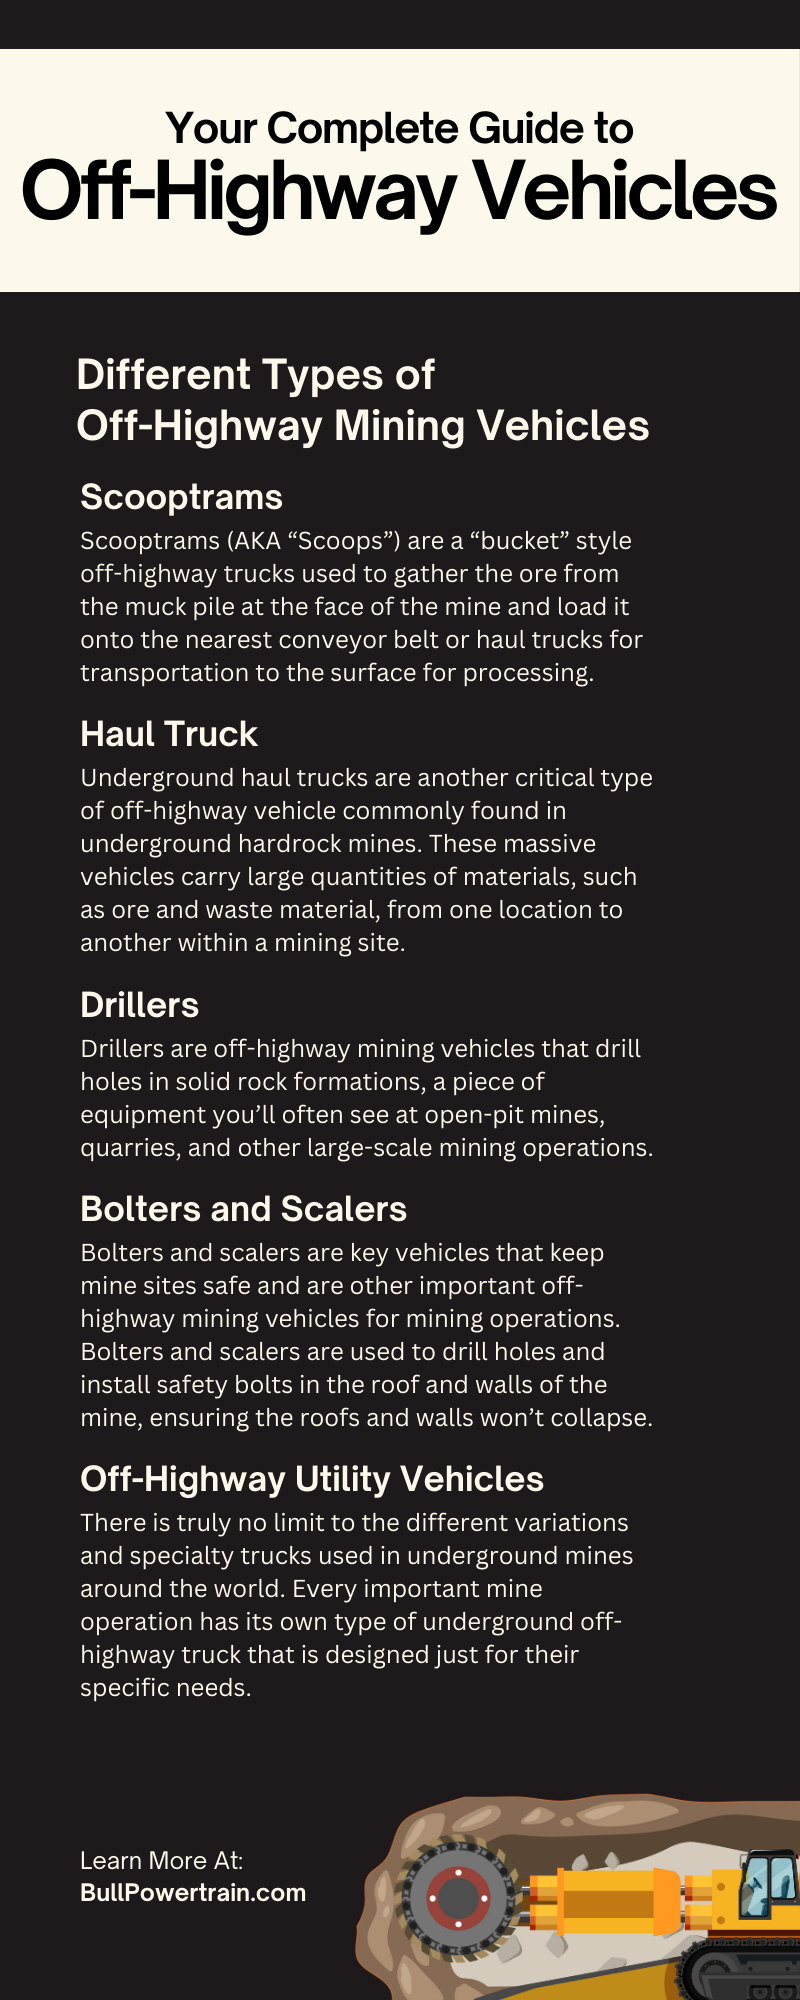 Your Complete Guide to Off-Highway Vehicles
